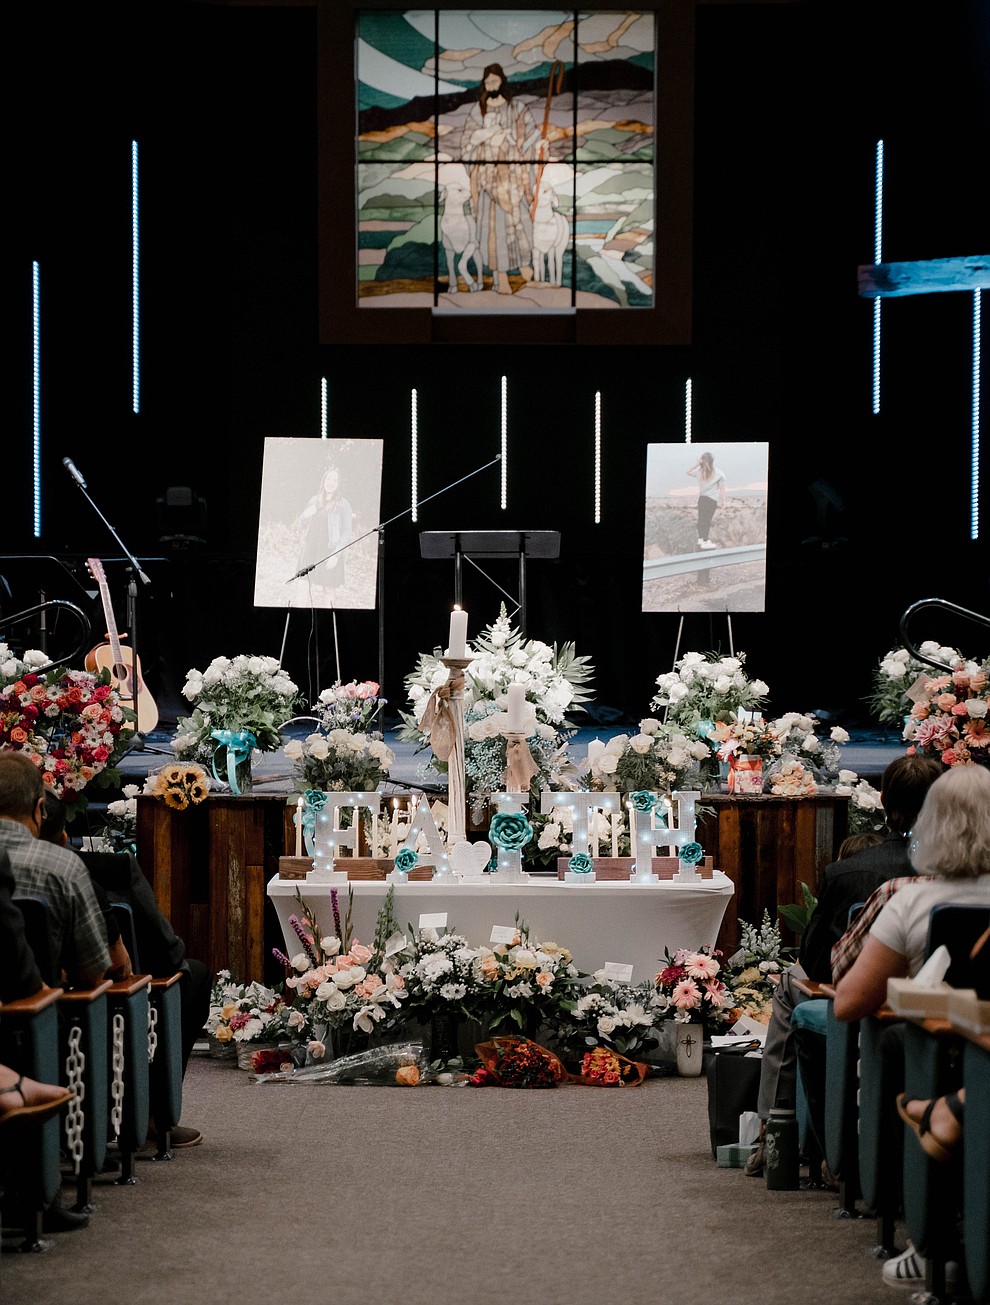 A celebration of life for 16-year-old Faith Moore was held at Verde Community Church in Cottonwood on Sunday, Aug. 8, 2021. (Jen Cox/Courtesy)